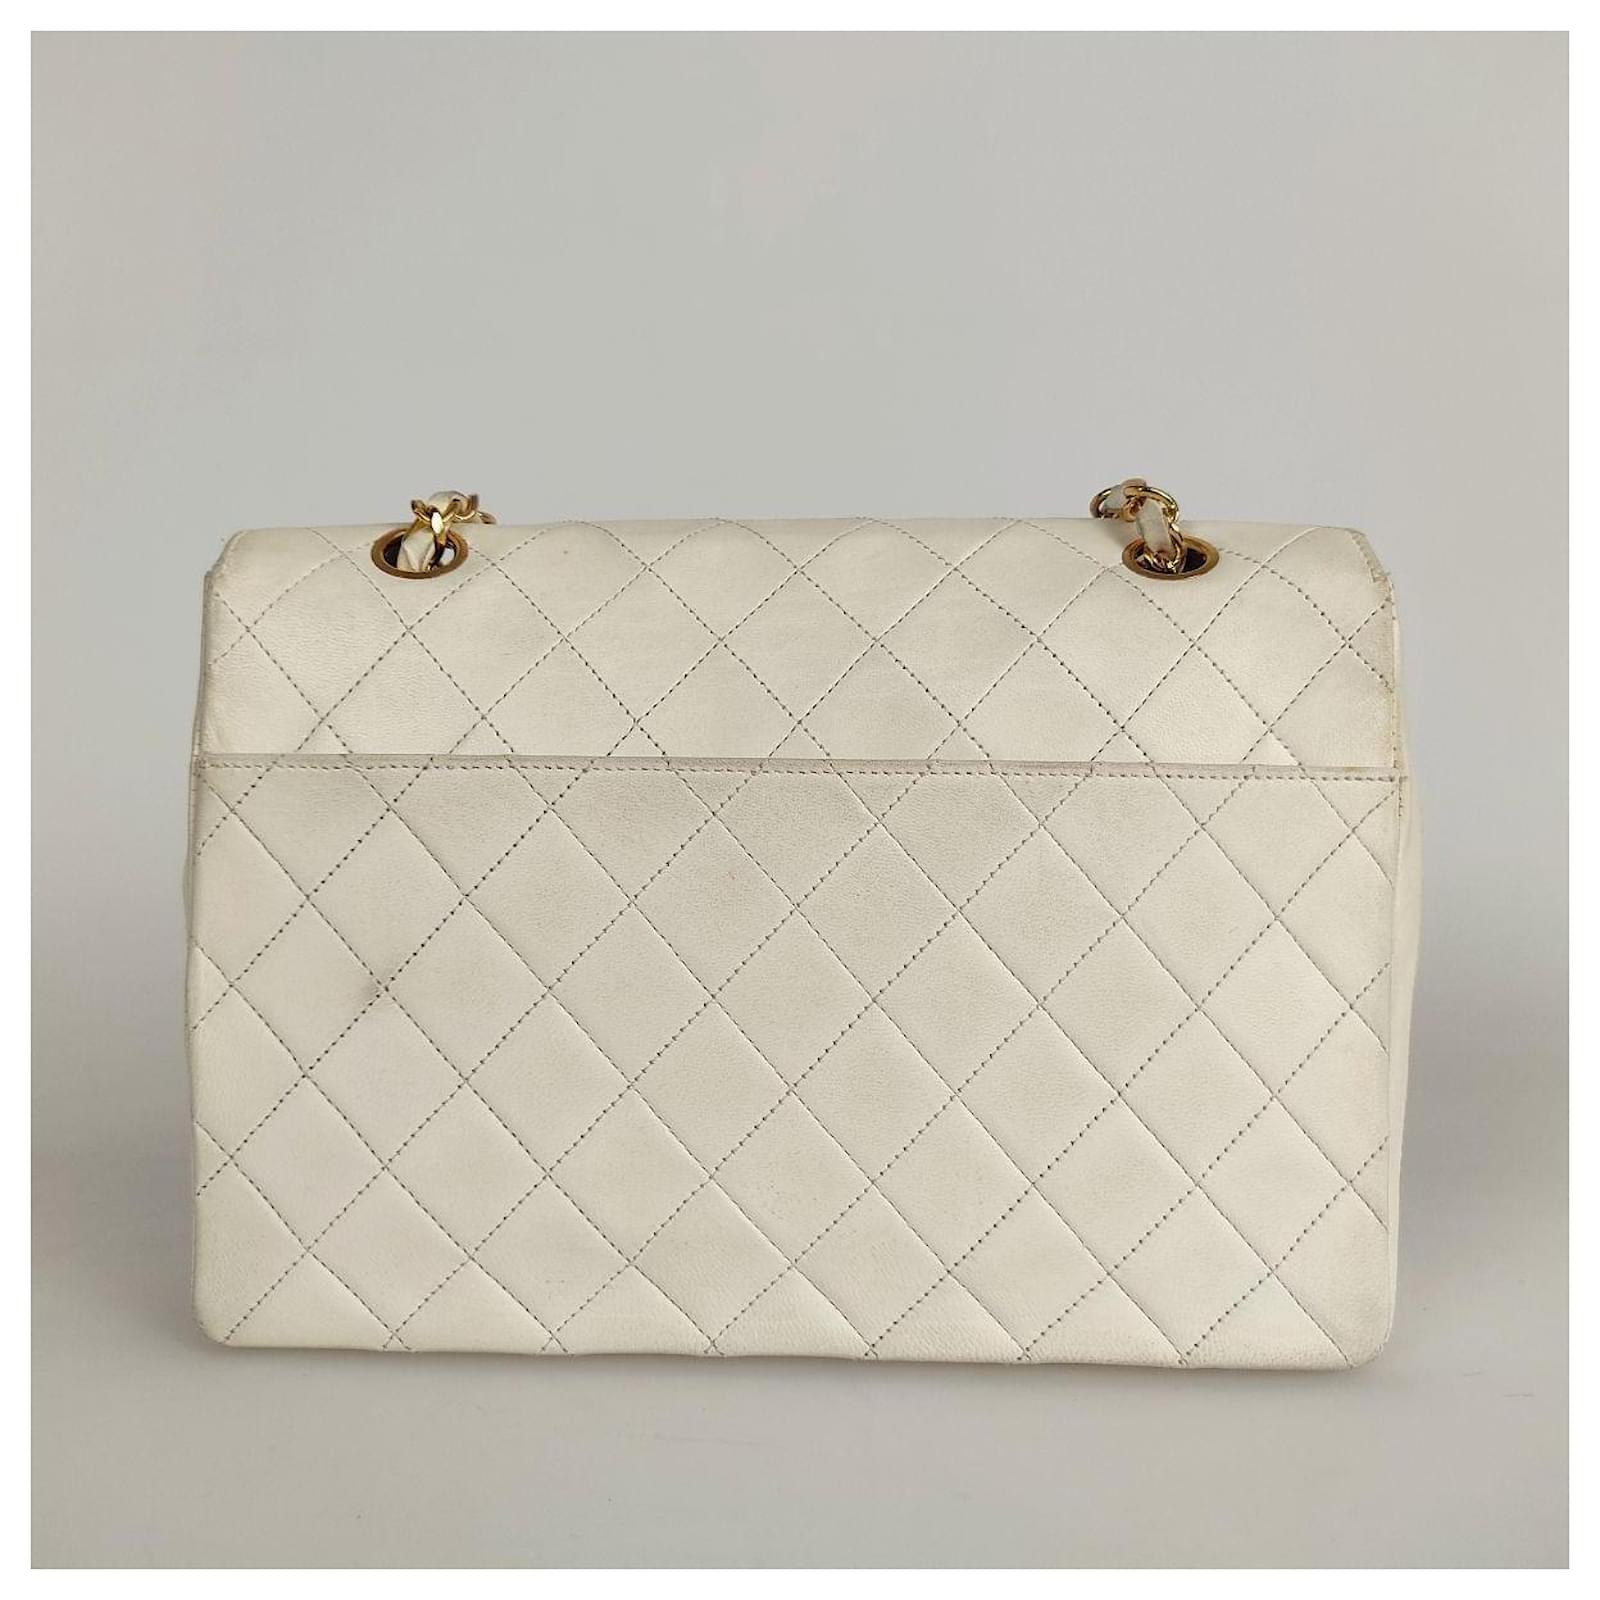 Chanel bag Classica Timeless Matelassè single flap in white leather